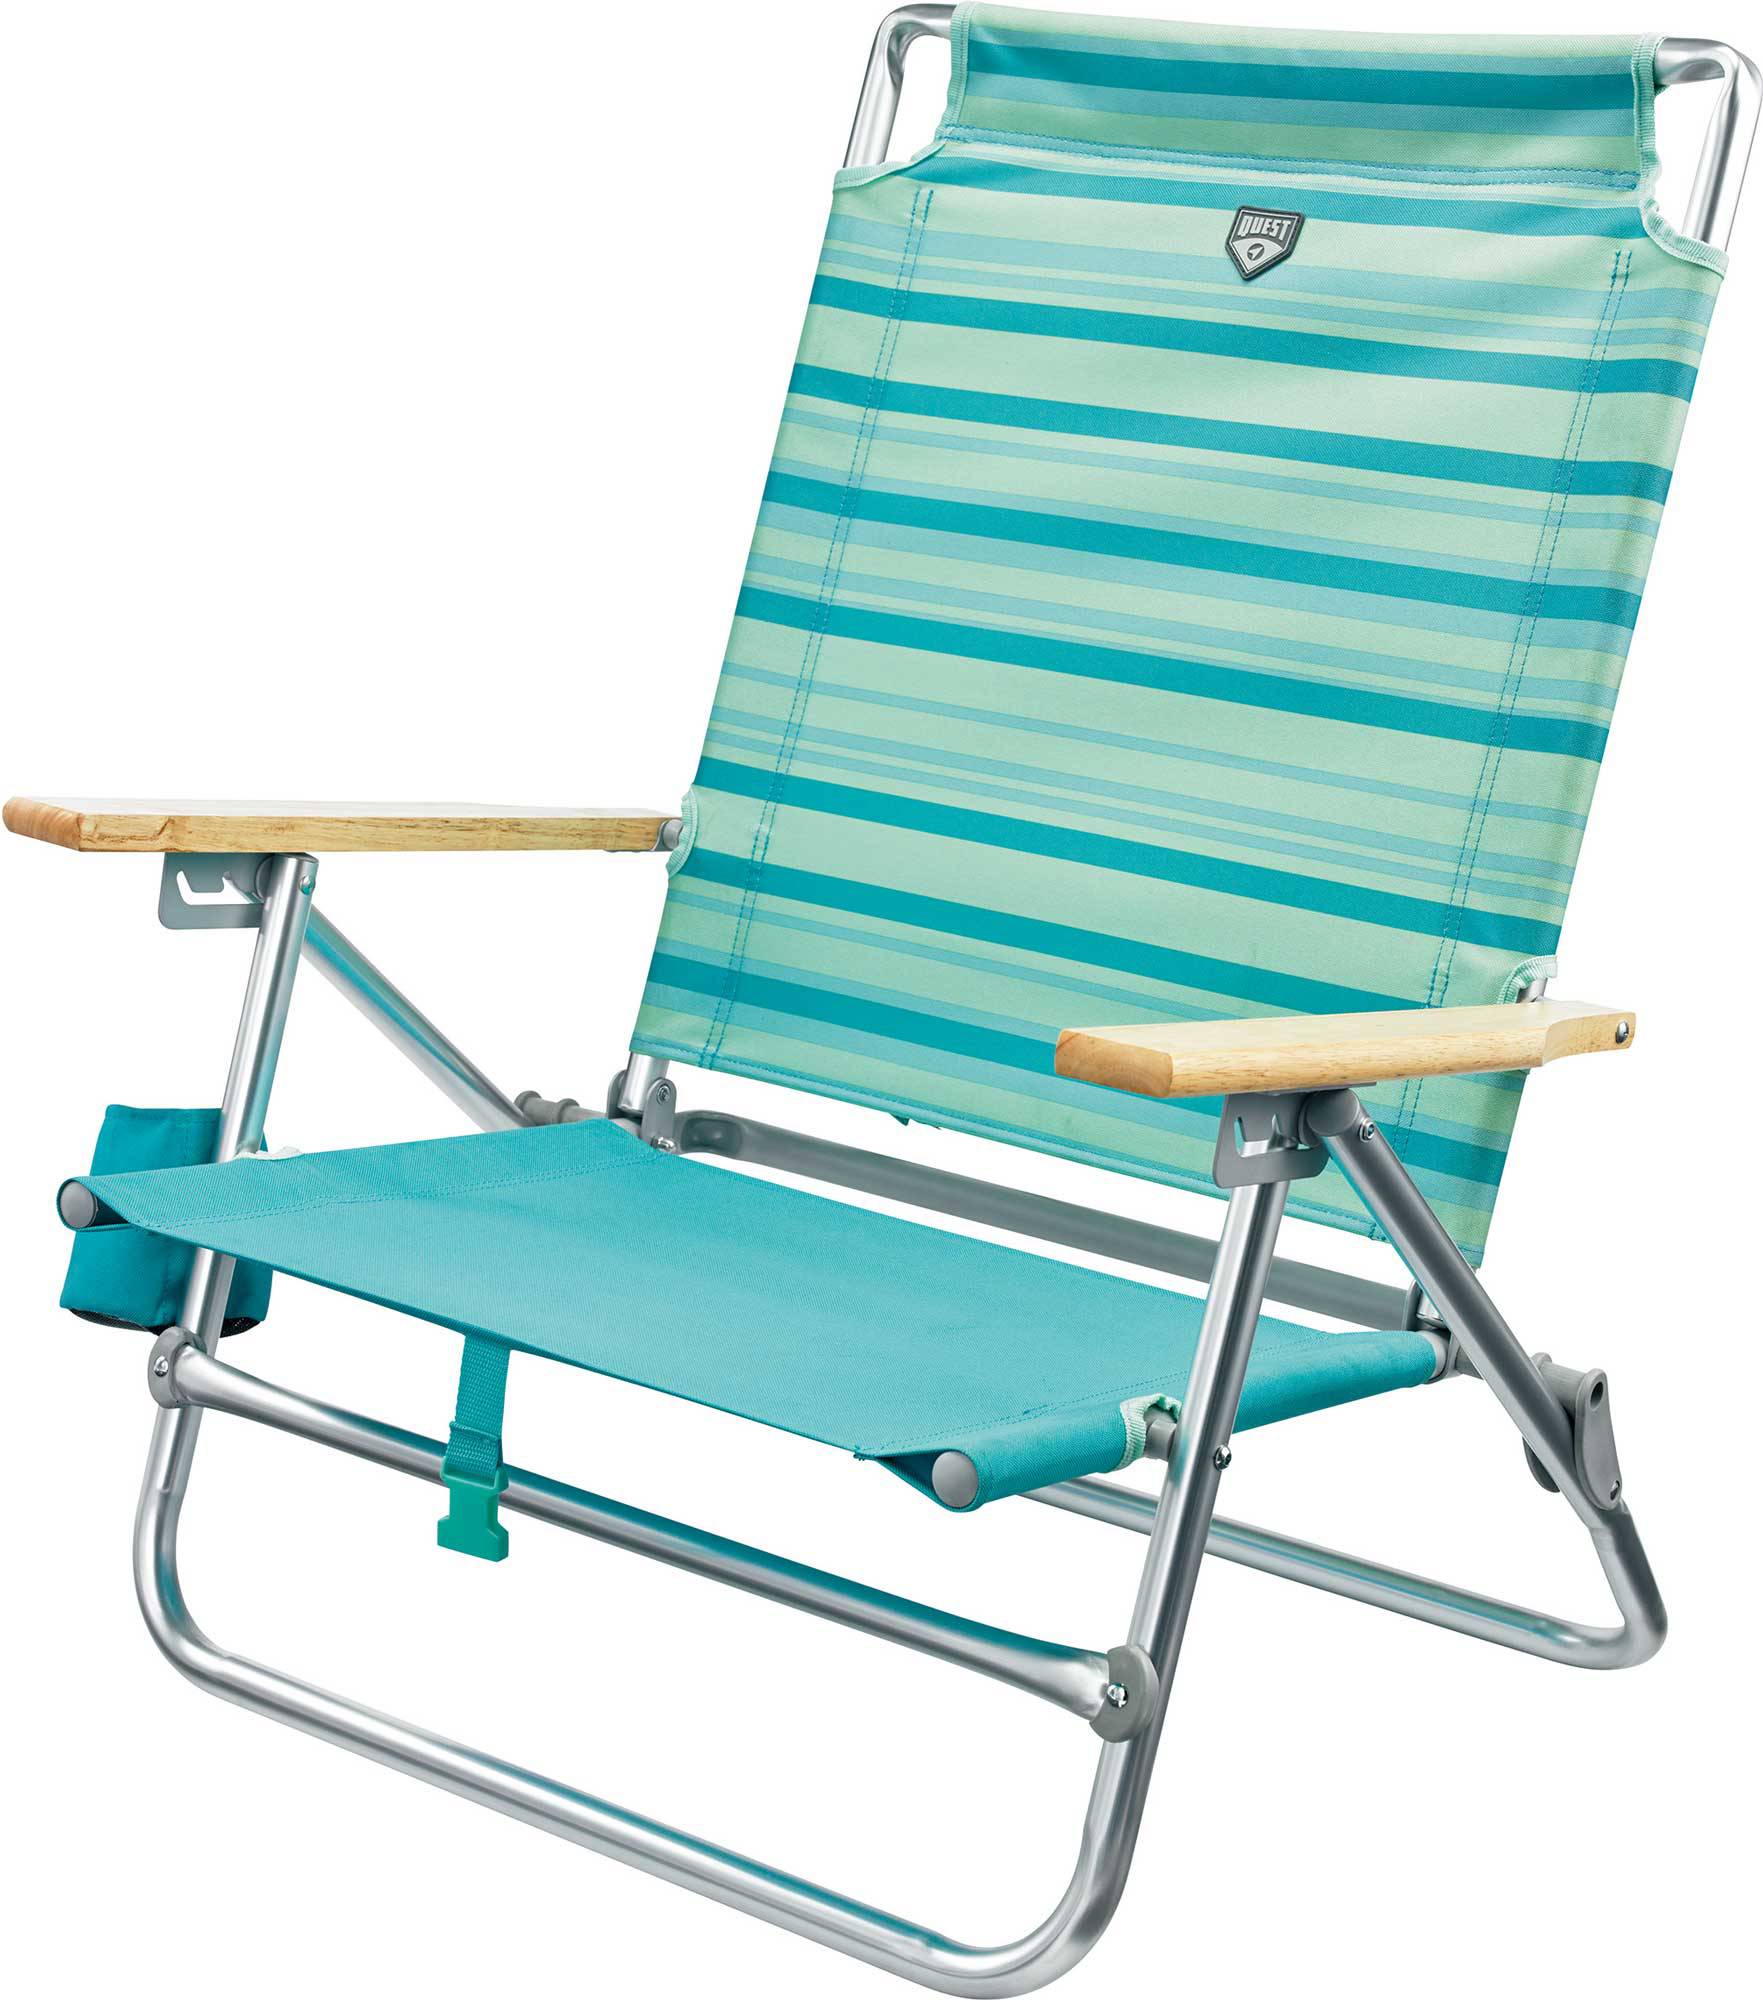 Simple Ostrich South Beach 5 Position Sand Chair with Simple Decor